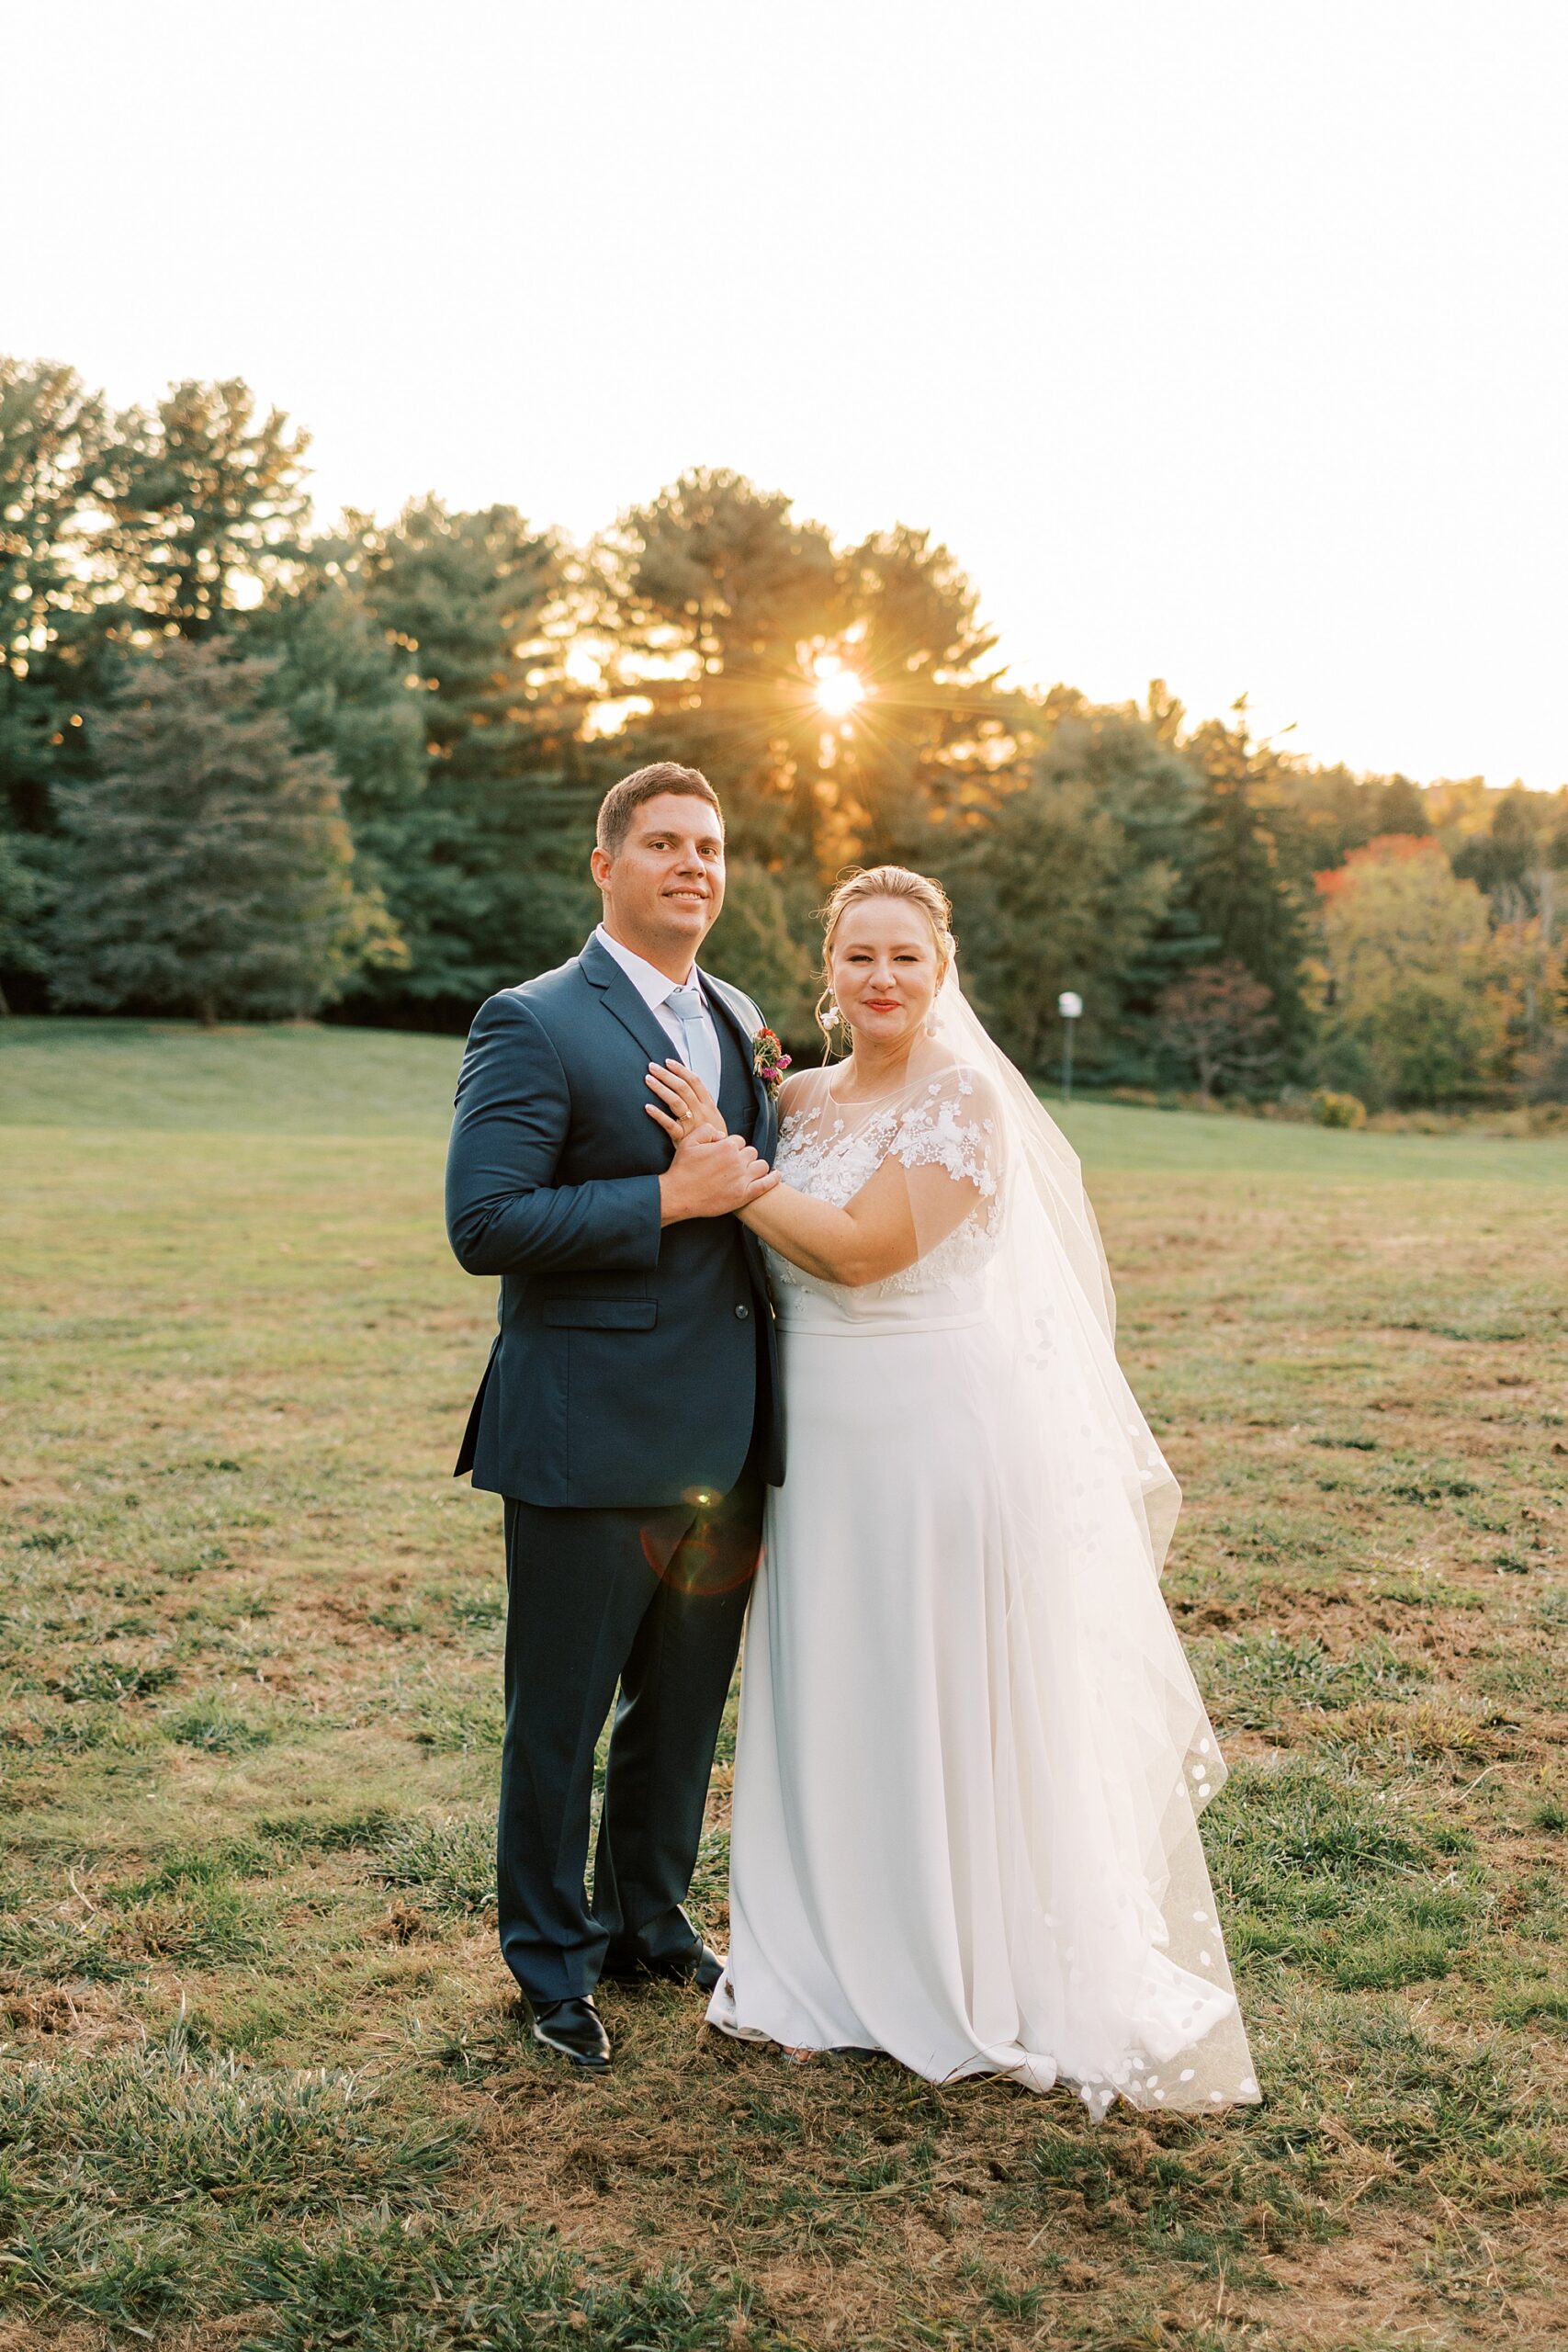 newlyweds smile together on lawn at sunset